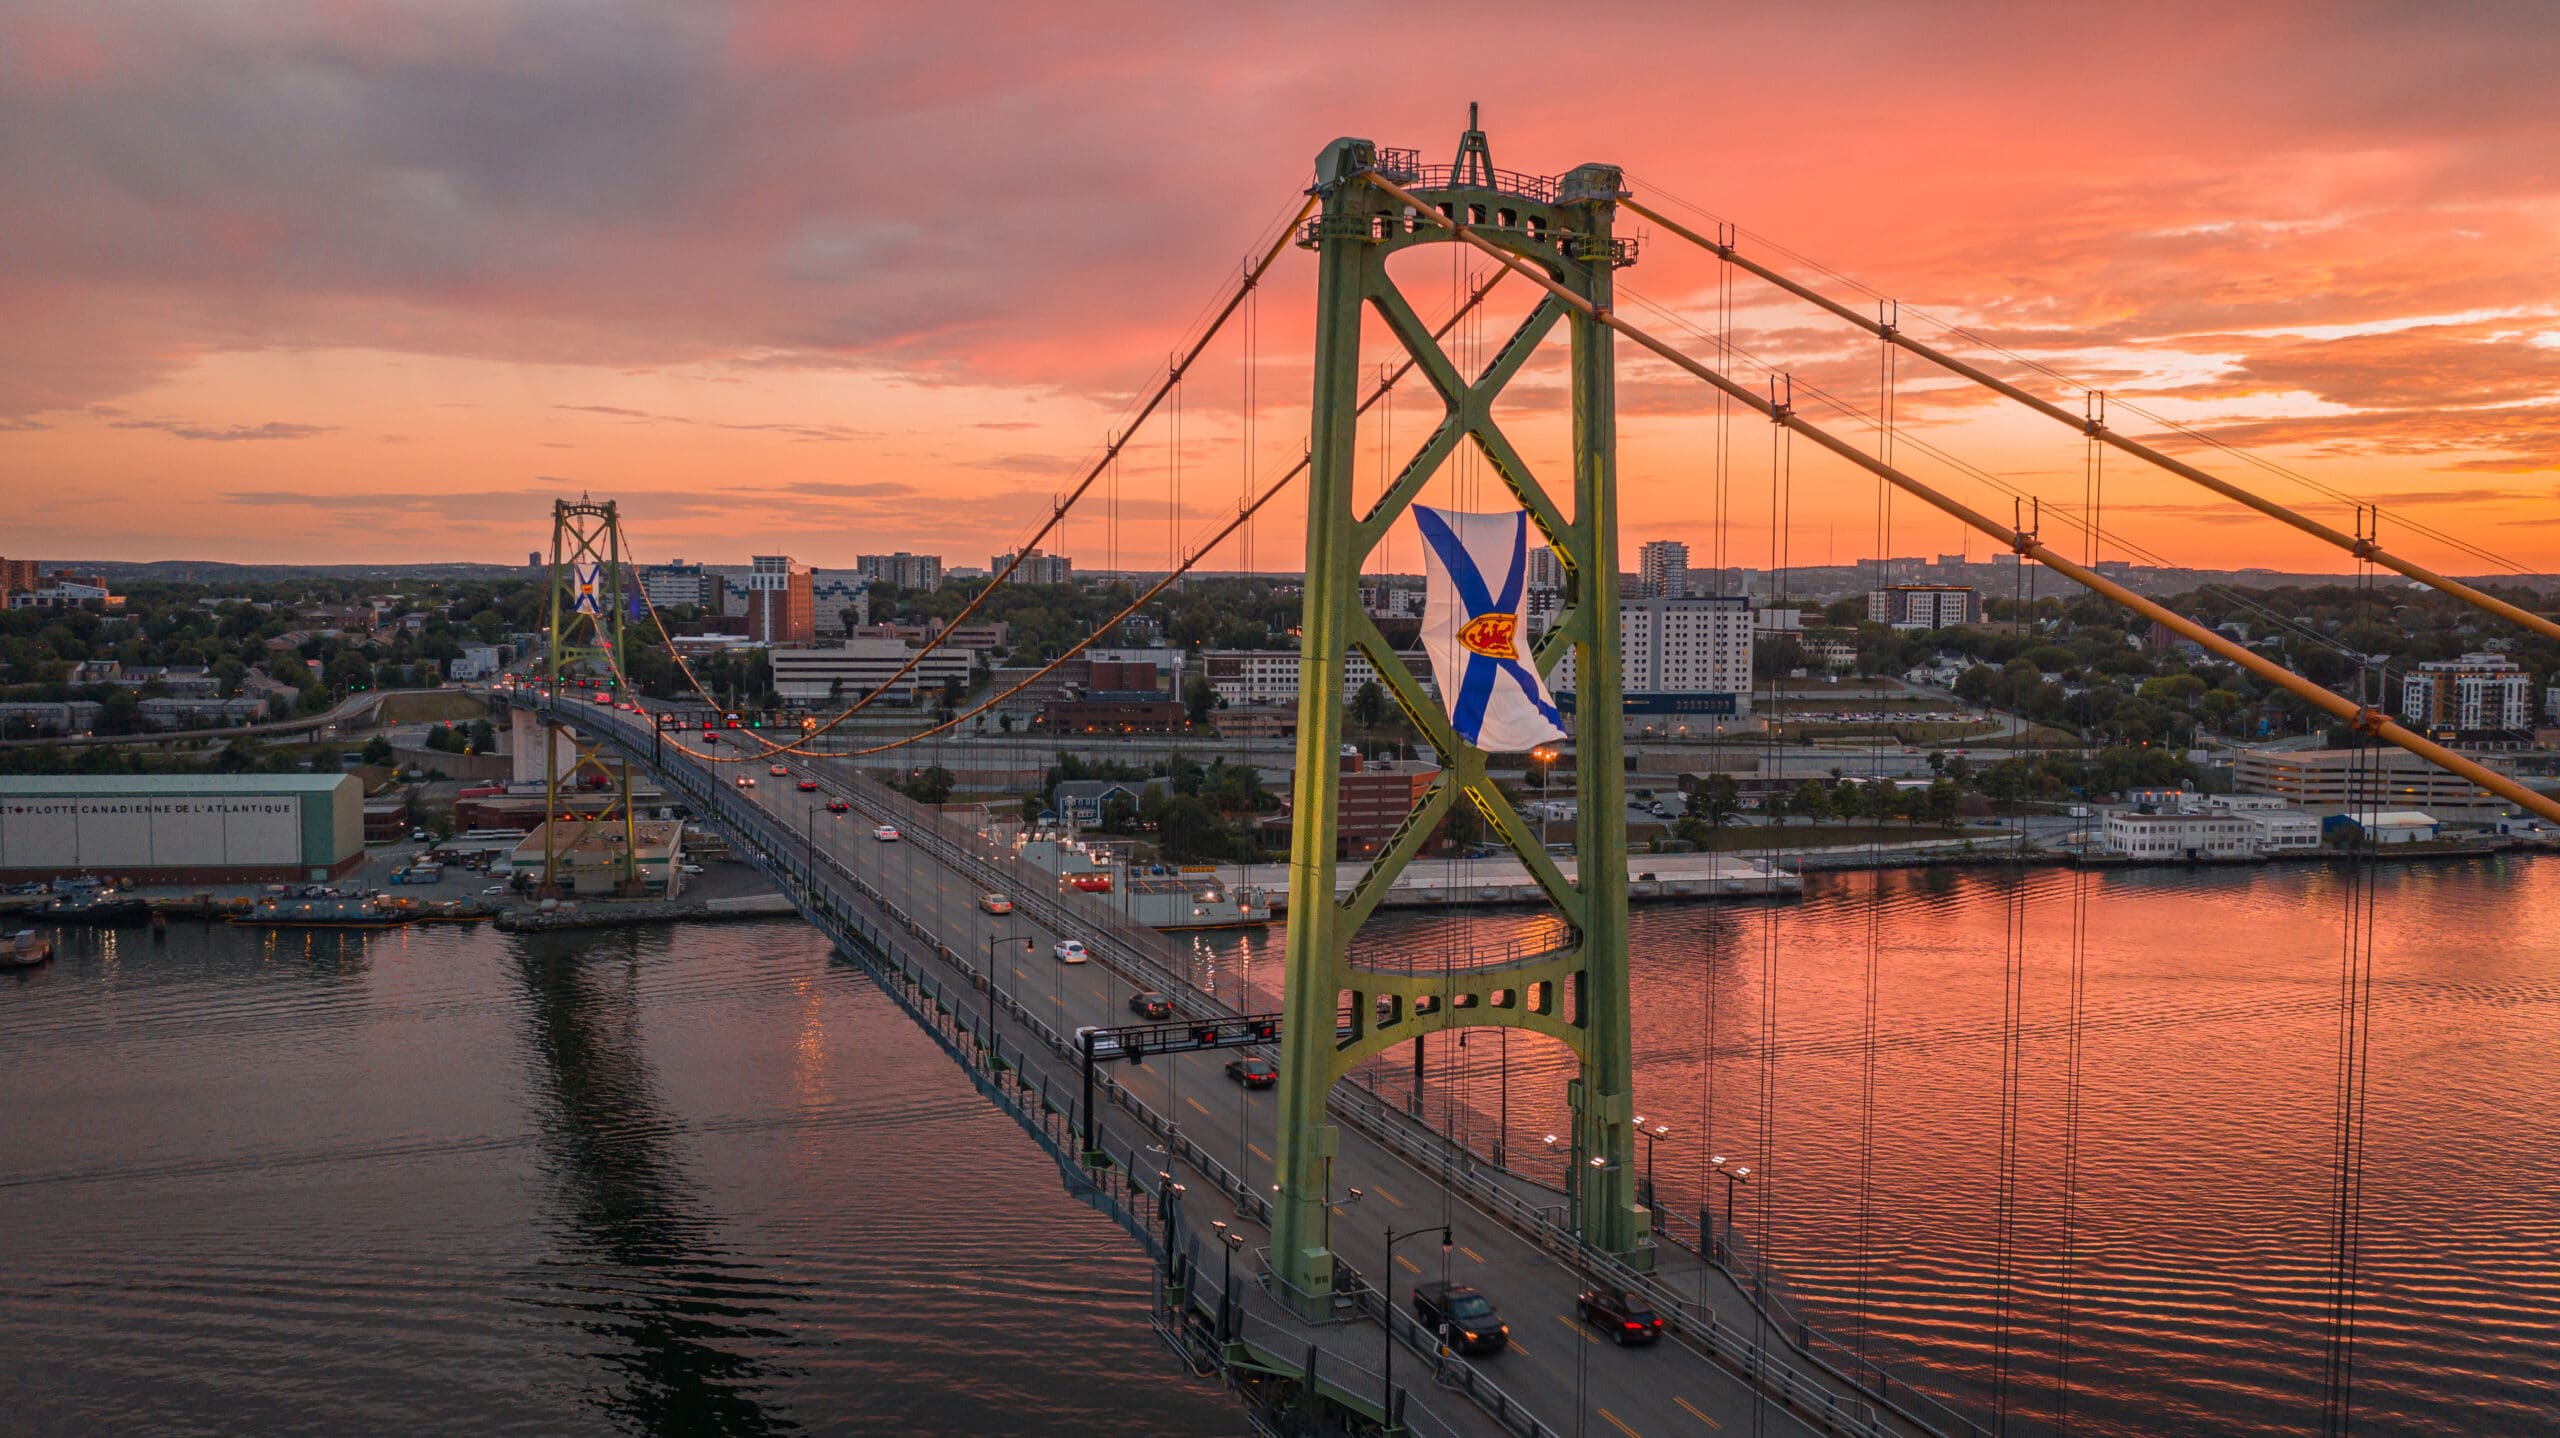 A photo of the Macdonald Bridge in Halfiax at sunset with Nova Scotia flags flying from the towers.